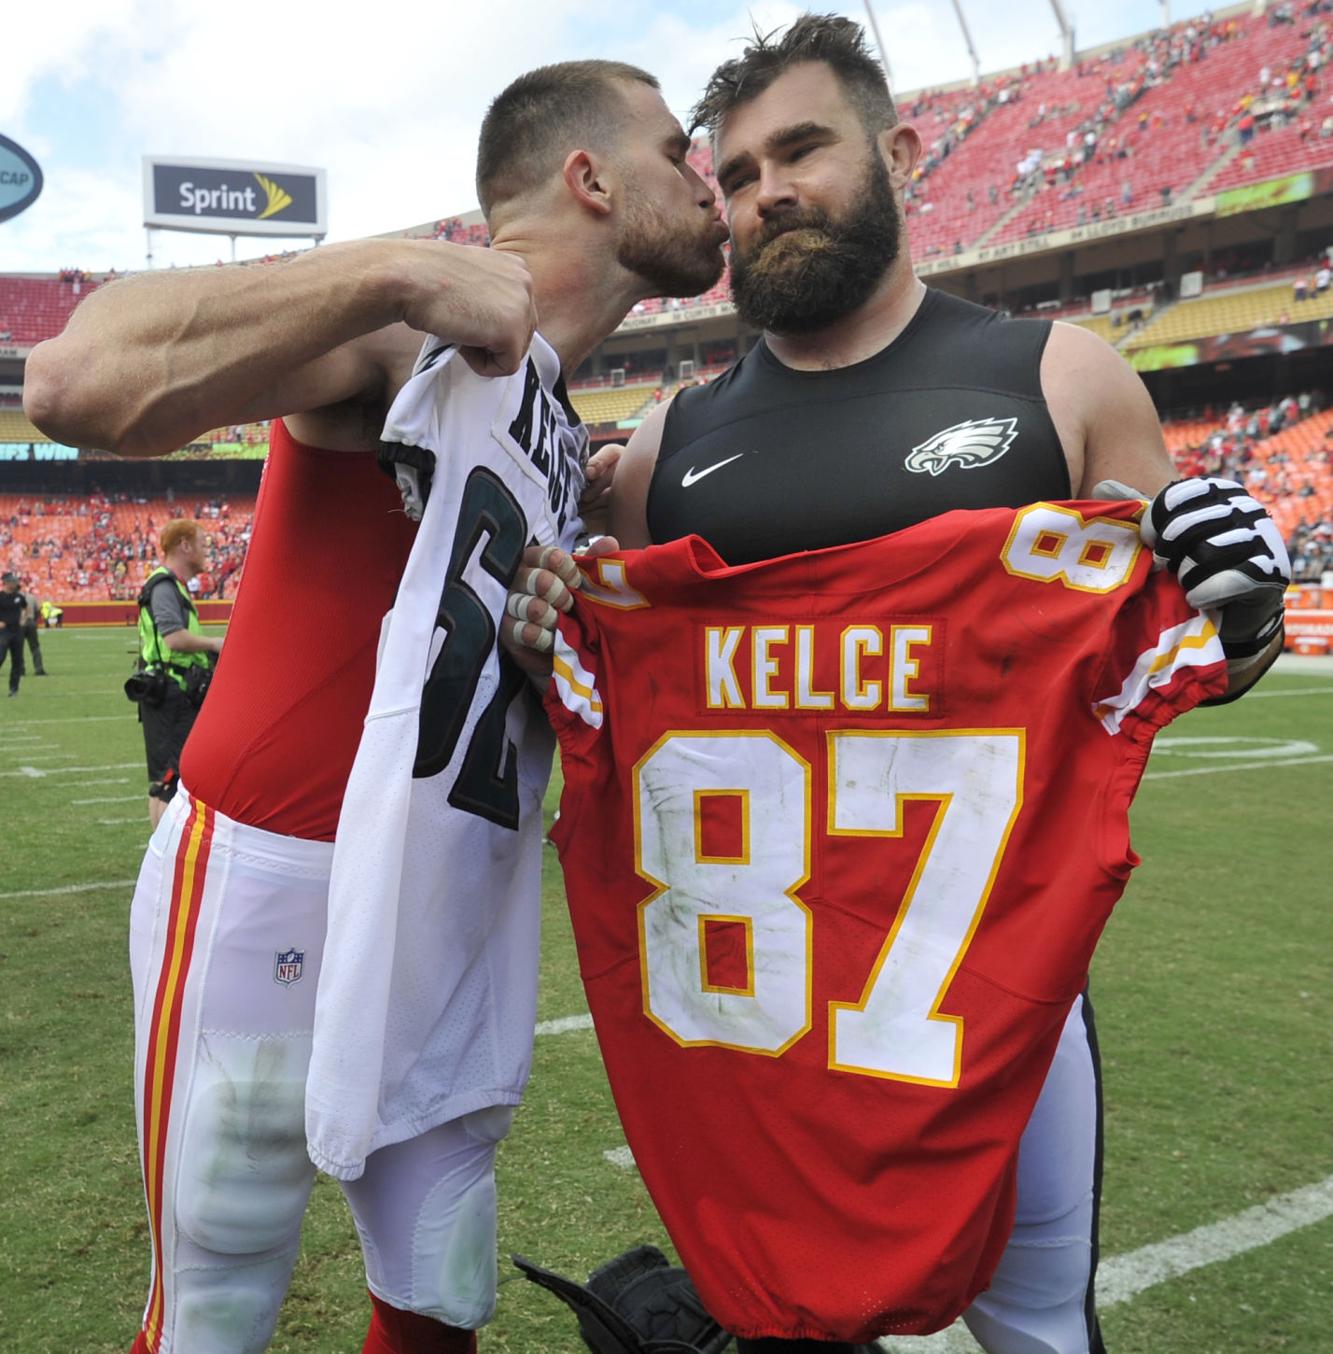 Shaw: It's time for Travis Kelce to grow into the mature player he says he is | Sports | kansan.com